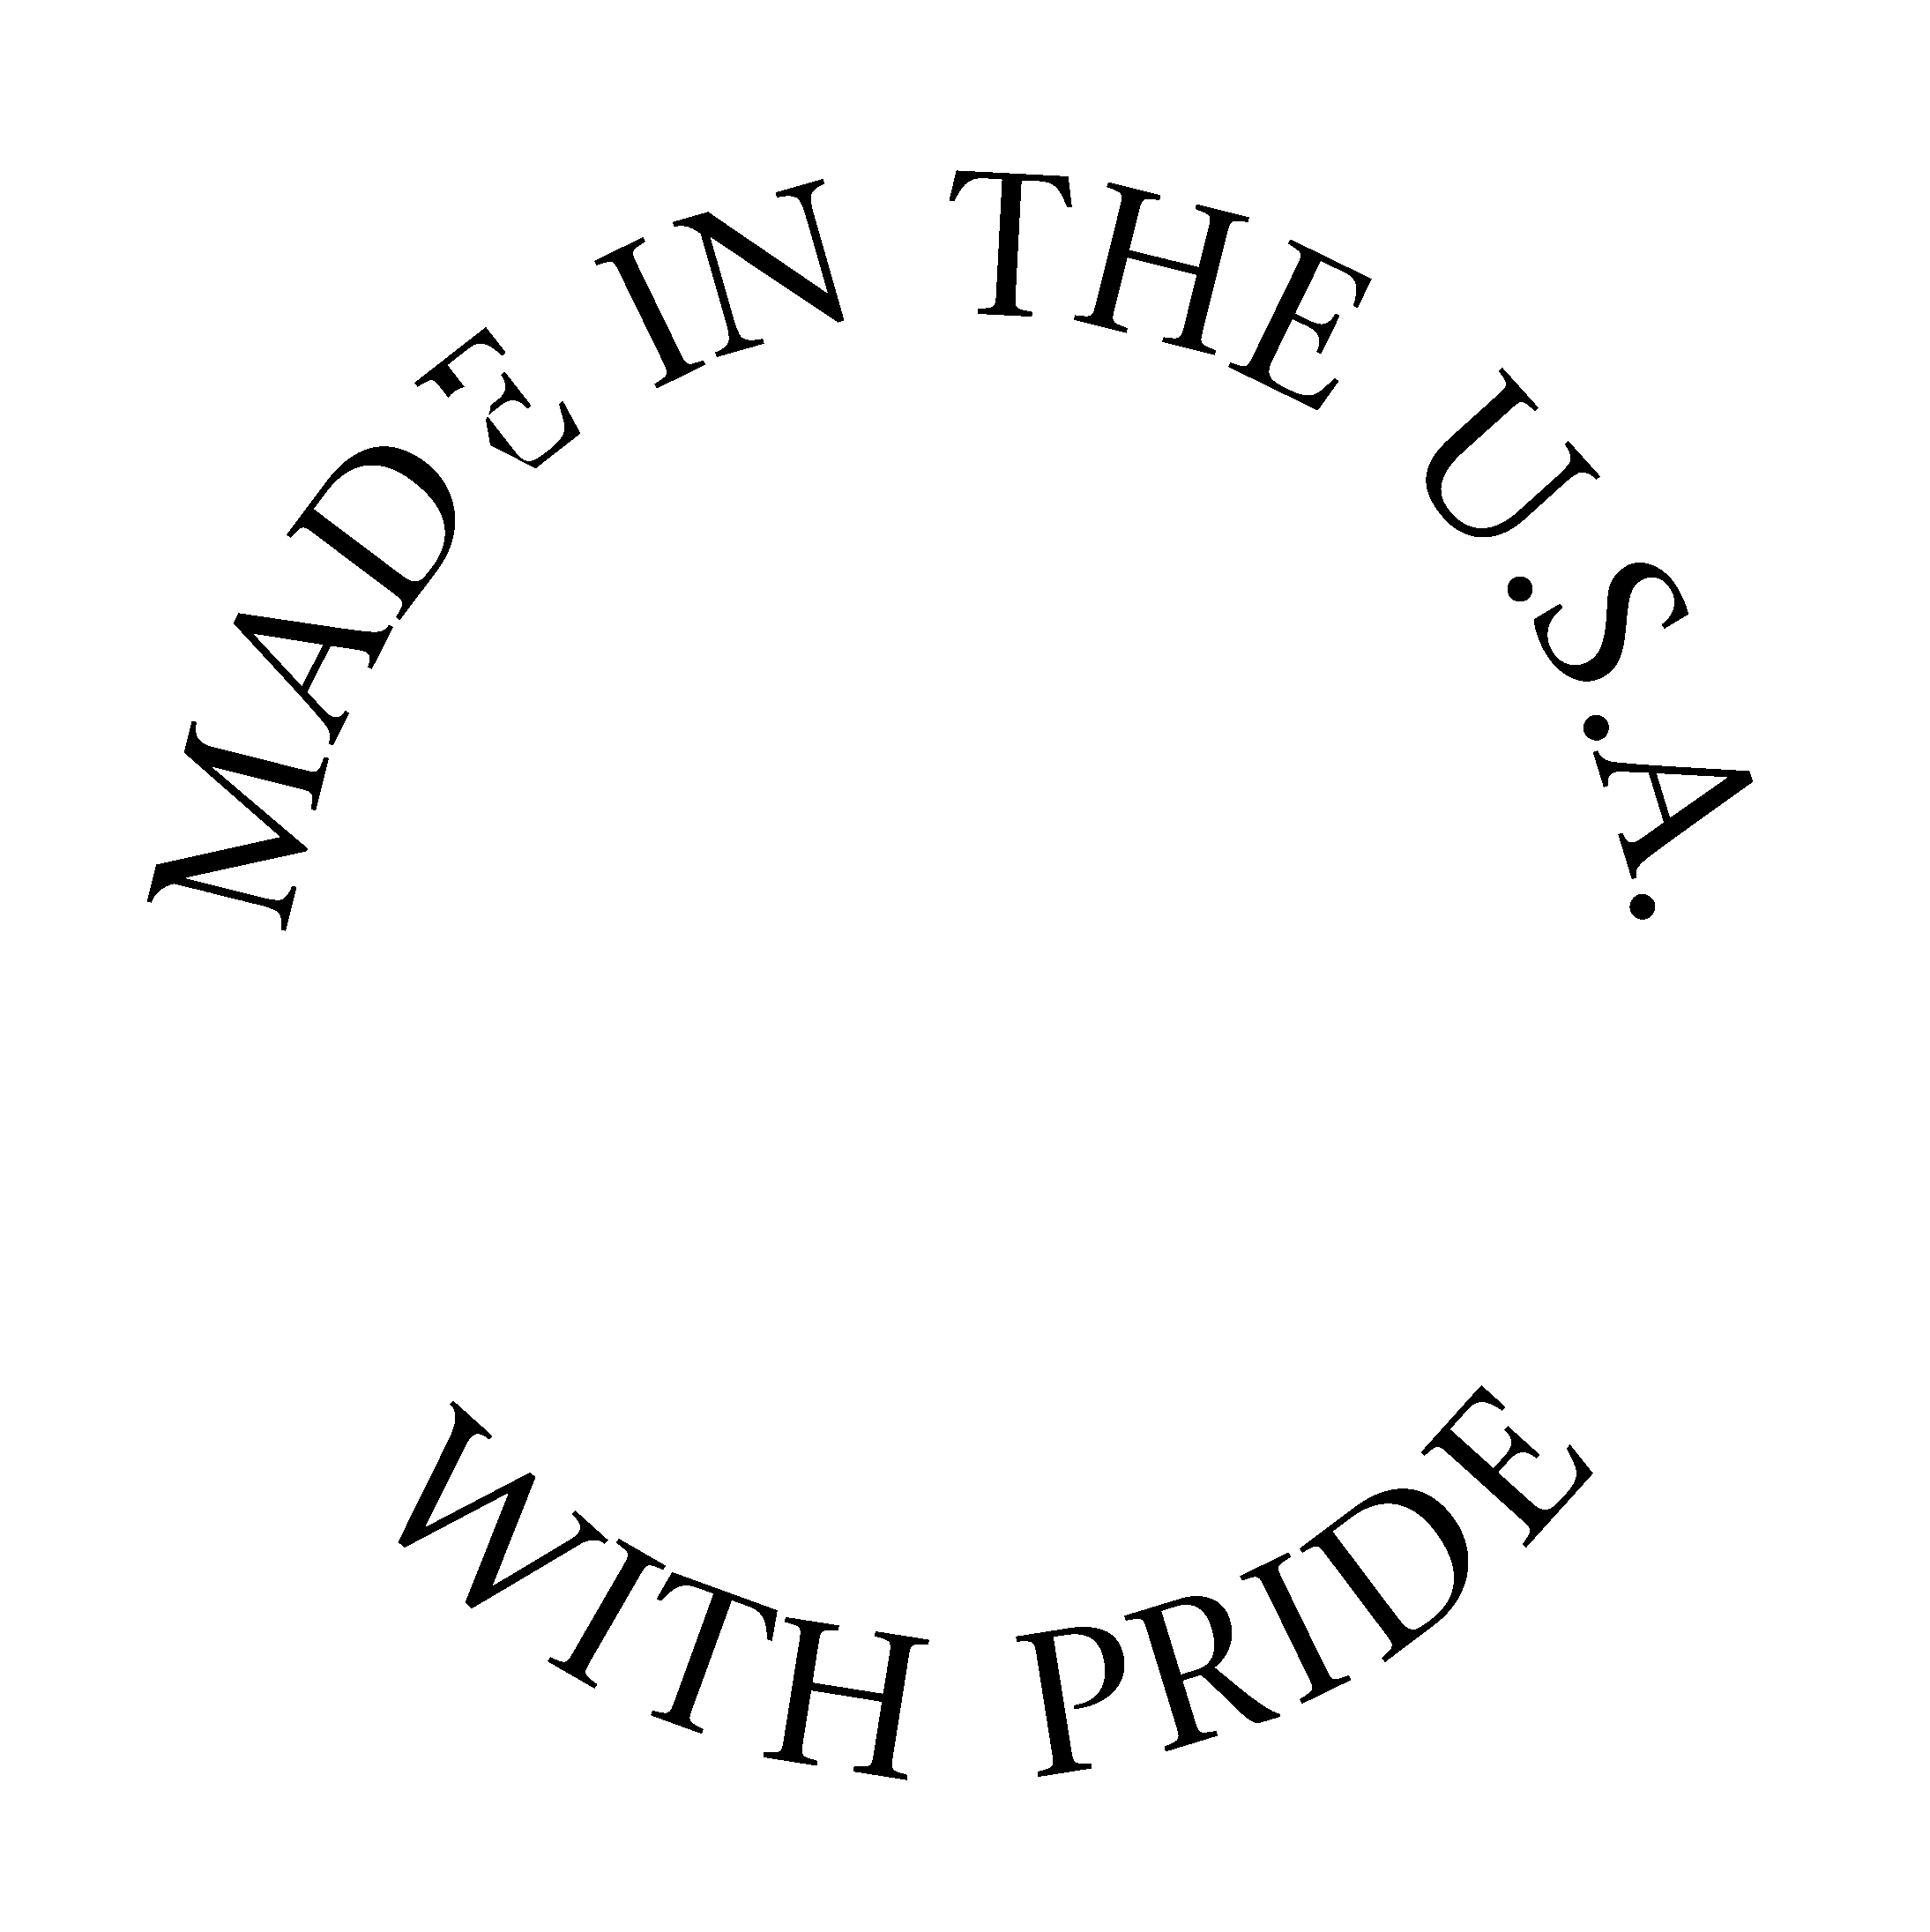 Madein U S A With Pride Seal